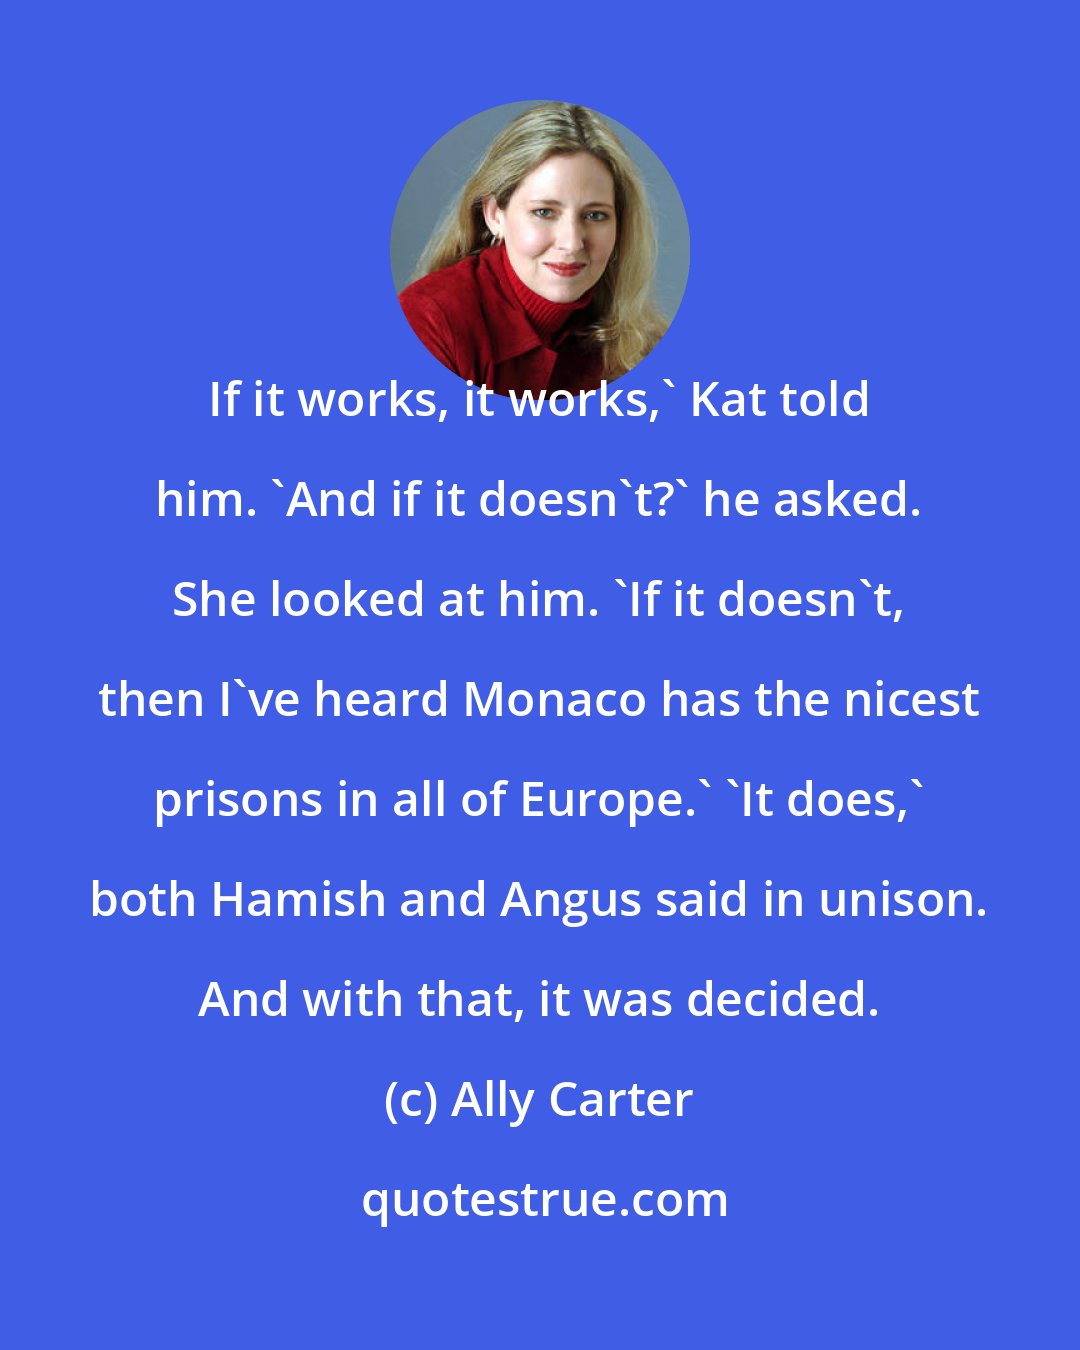 Ally Carter: If it works, it works,' Kat told him. 'And if it doesn't?' he asked. She looked at him. 'If it doesn't, then I've heard Monaco has the nicest prisons in all of Europe.' 'It does,' both Hamish and Angus said in unison. And with that, it was decided.